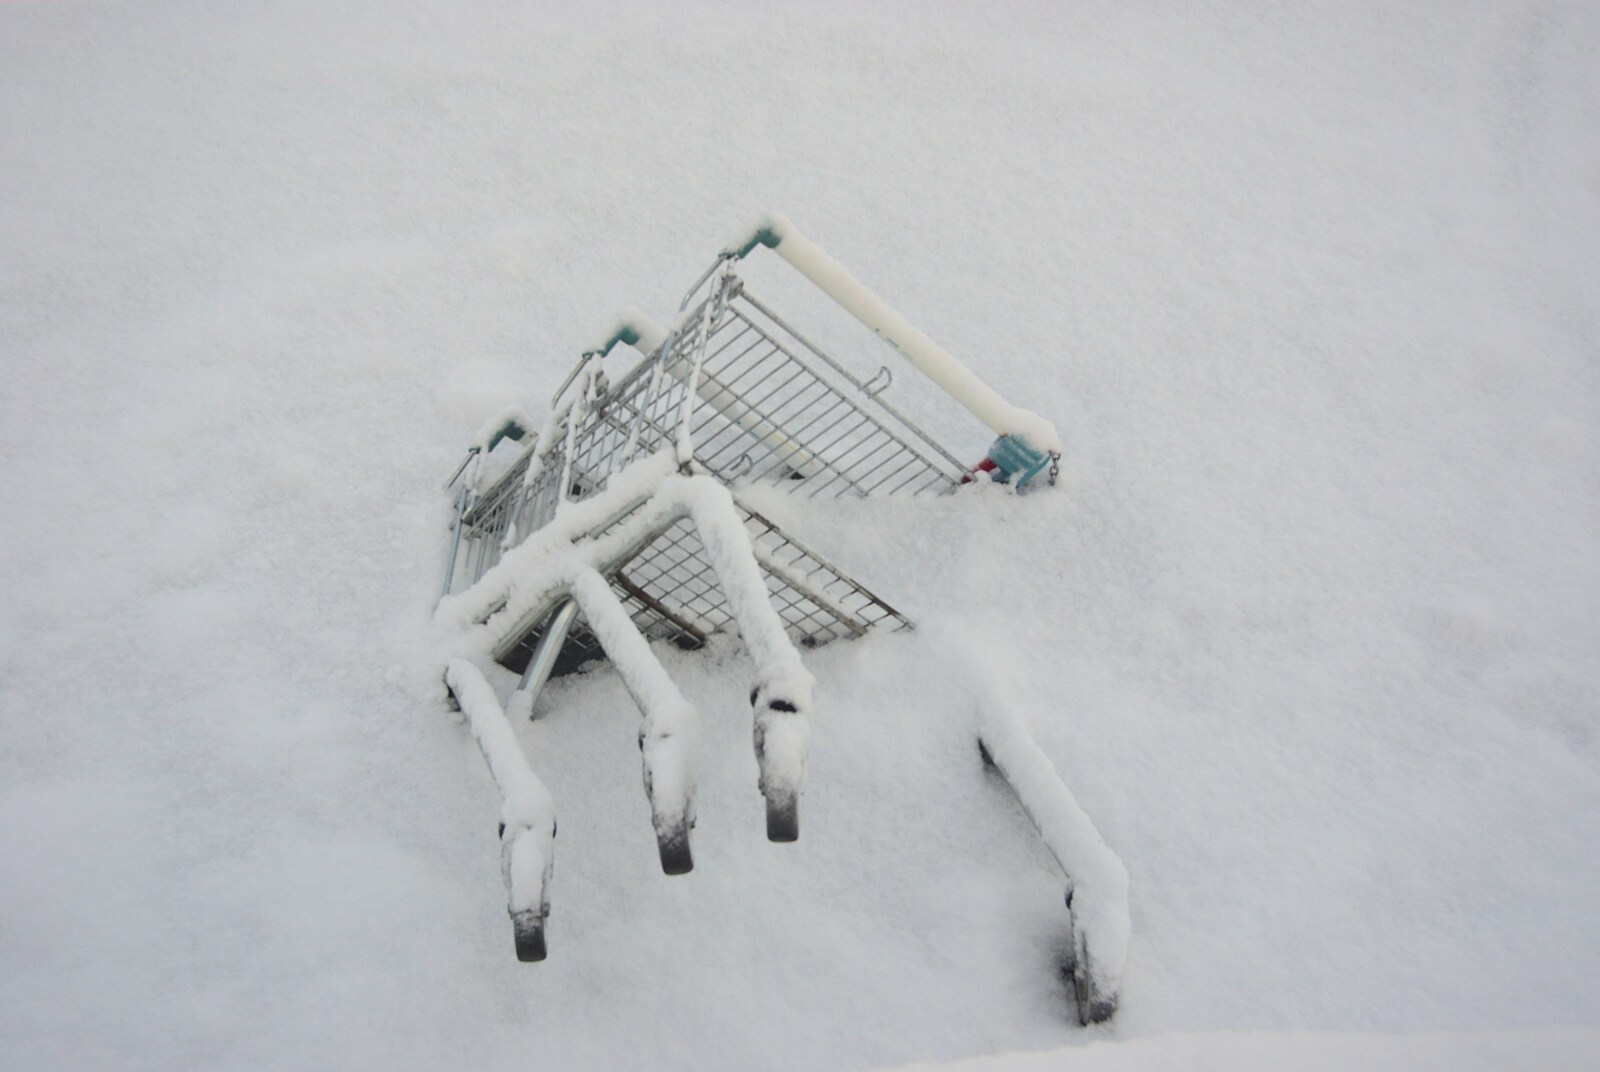 A Snowy Miscellany, Diss, Norfolk - 9th January 2010: Some more trolleys' legs stick out of the frozen Mere